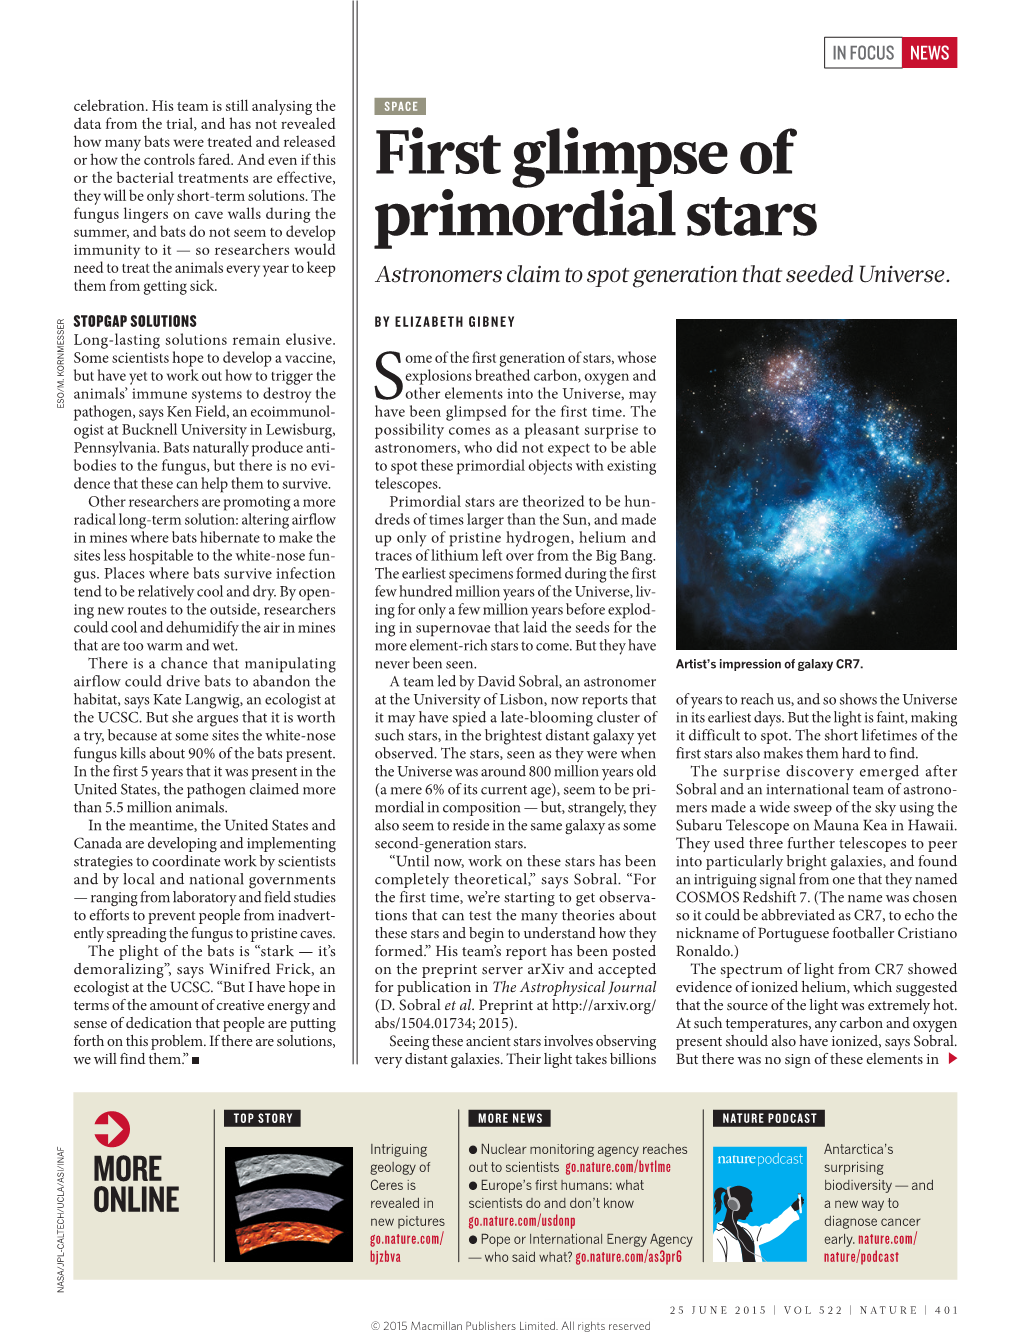 First Glimpse of Primordial Stars